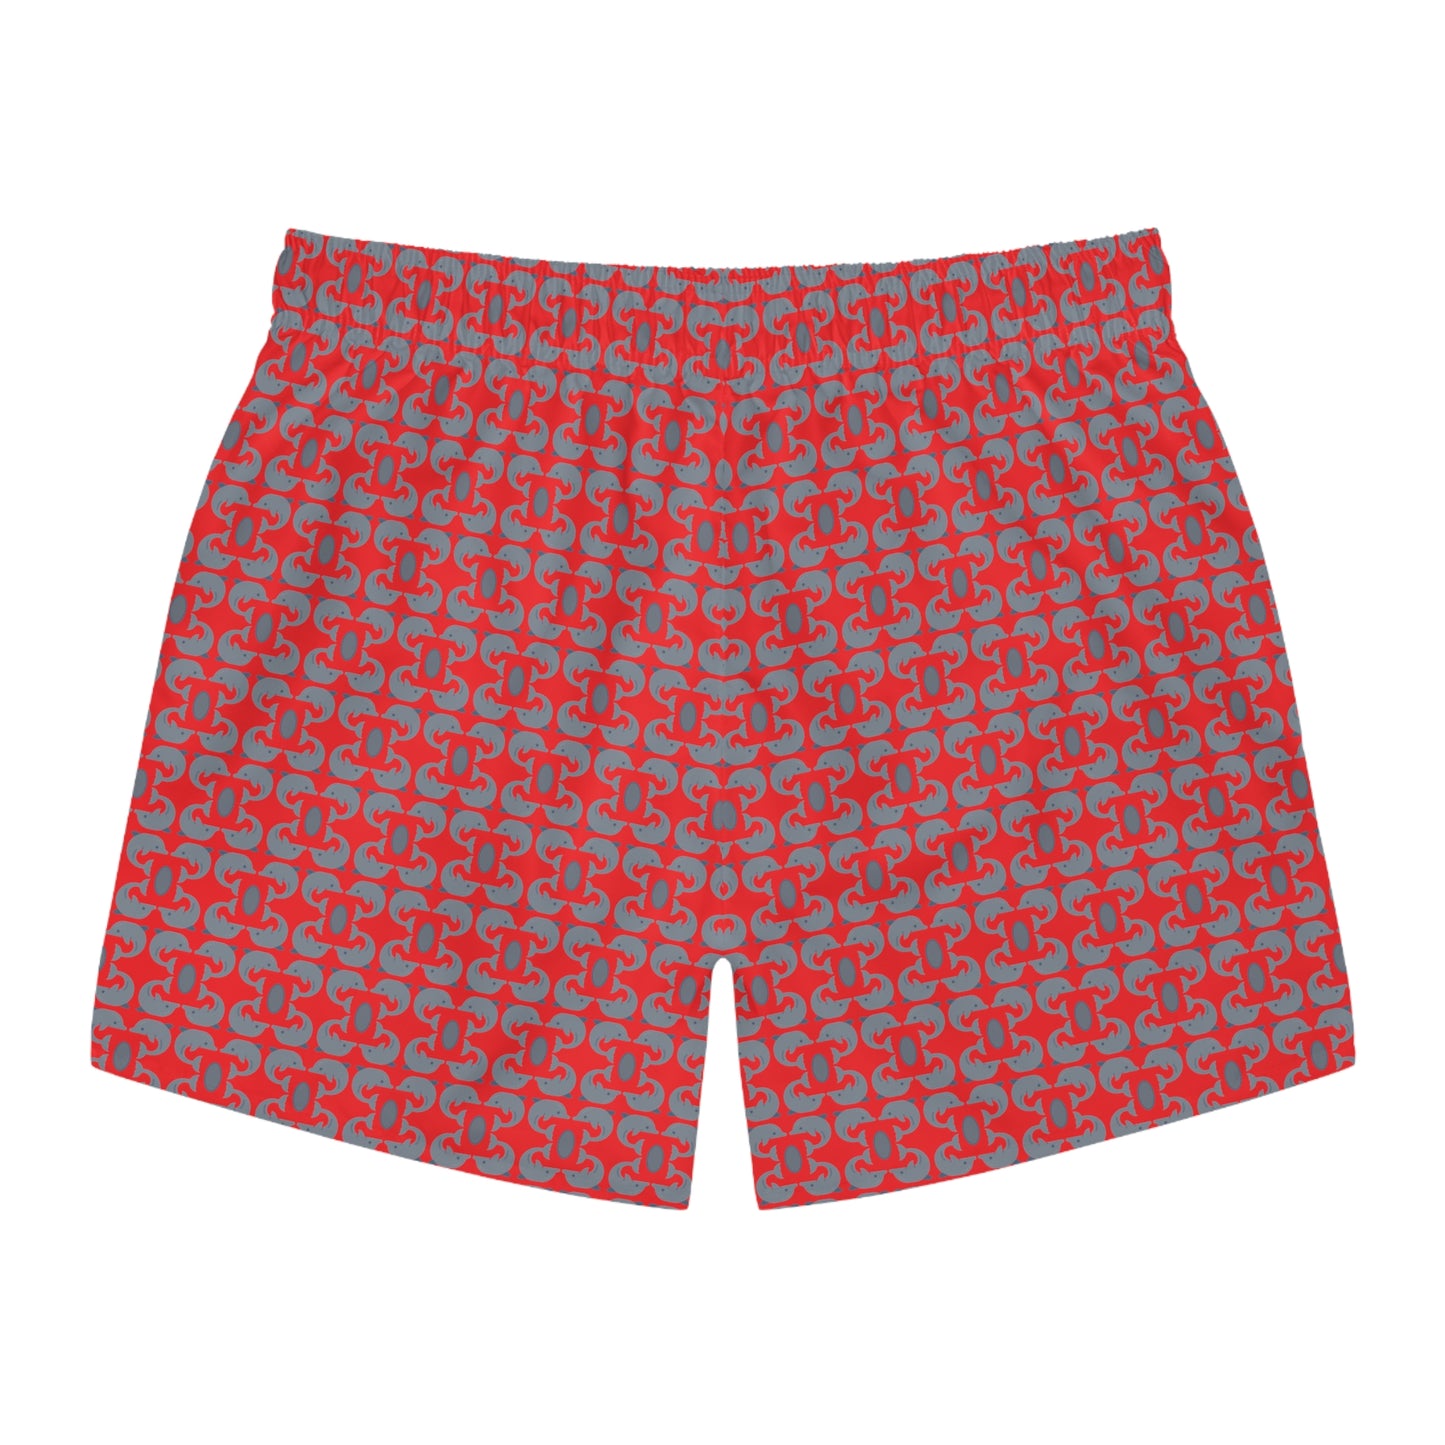 Playful Dolphins - Red ff0000 - Swim Trunks